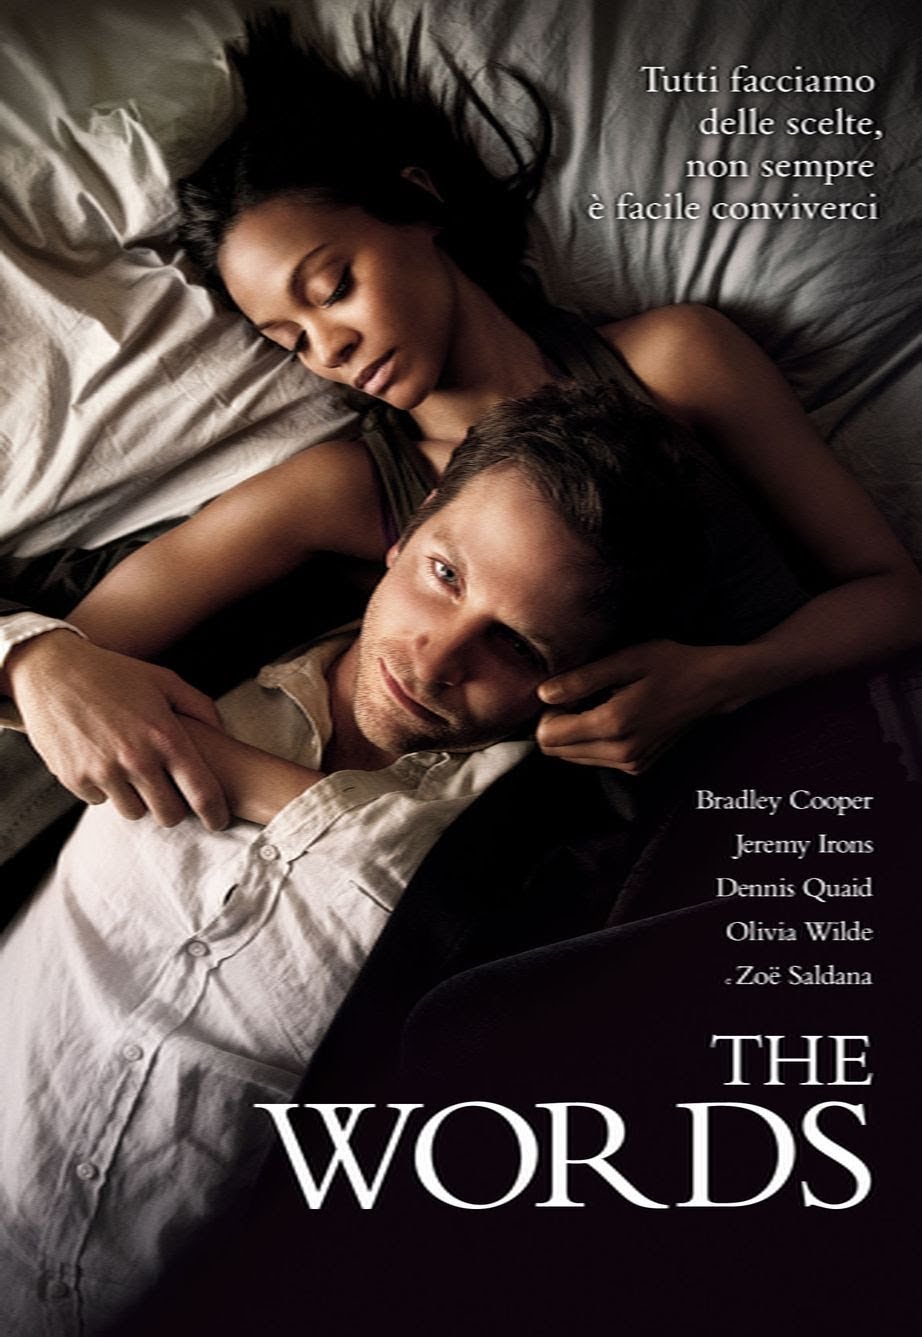 The Words [HD] (2012)